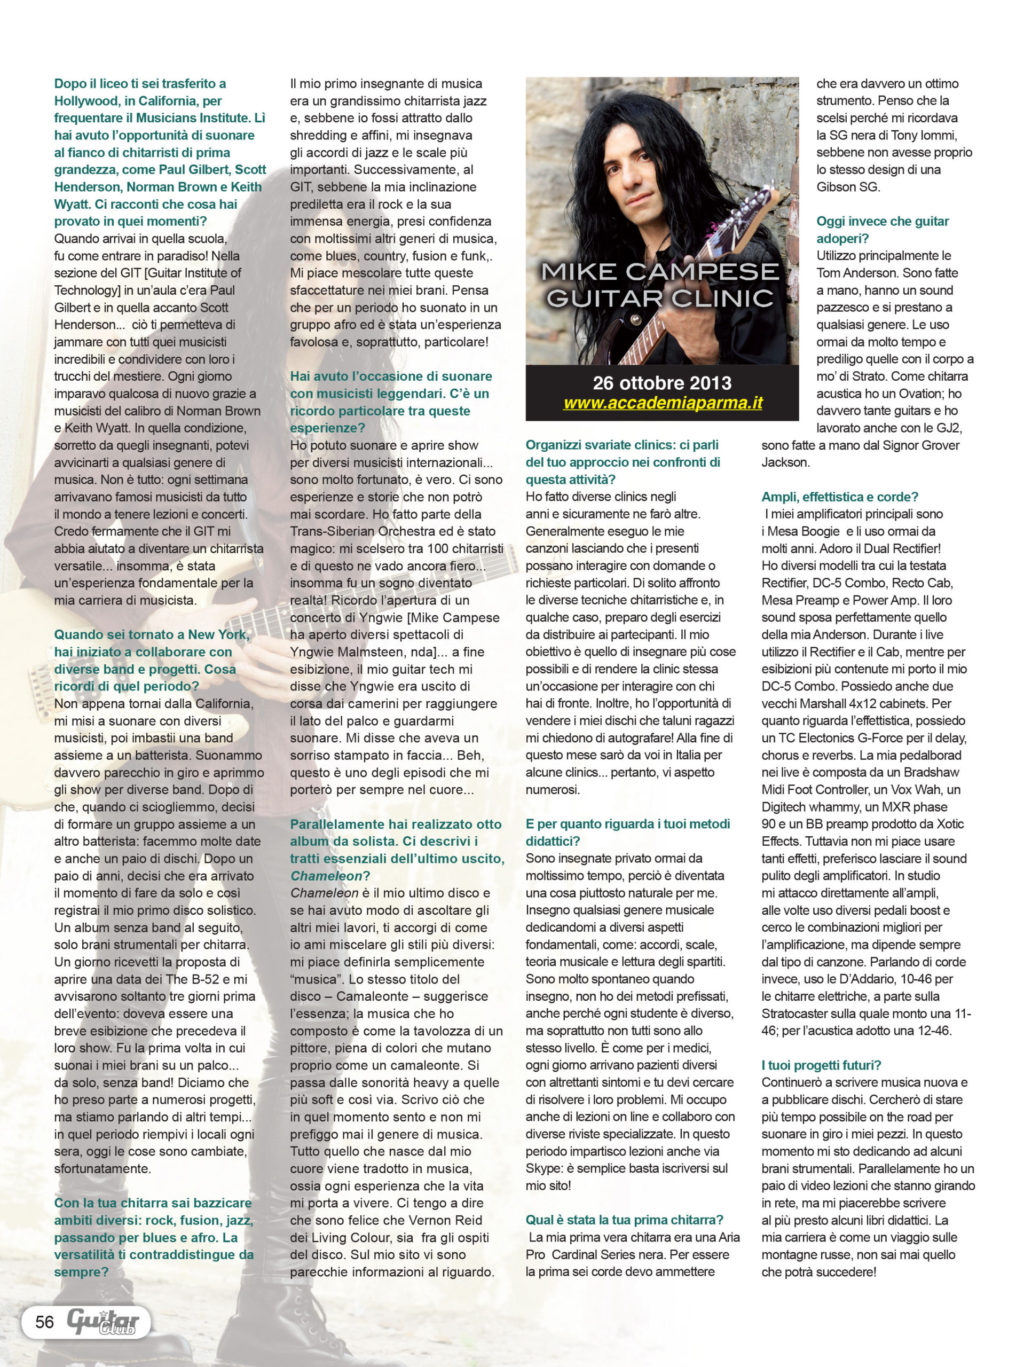 Mike Campese - Guitar Club Magazine 2013 Feature.